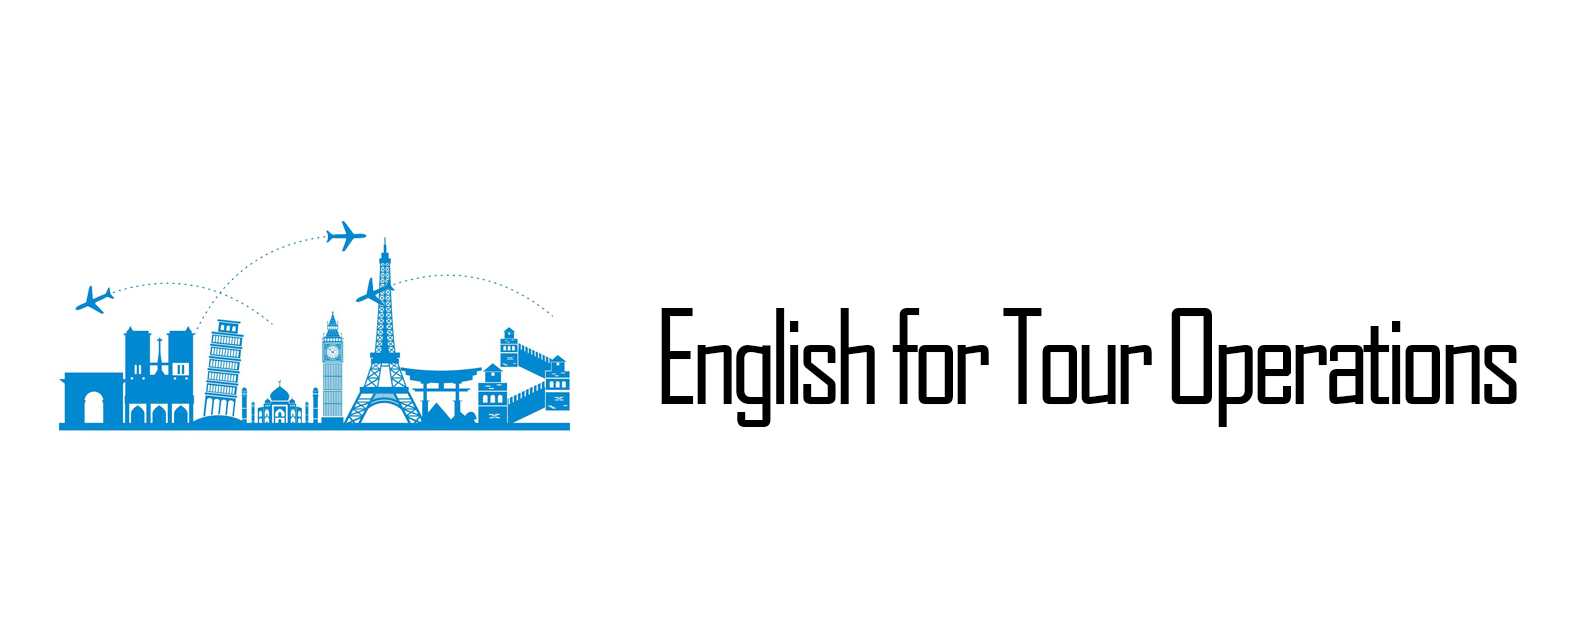 English for Tour Operations